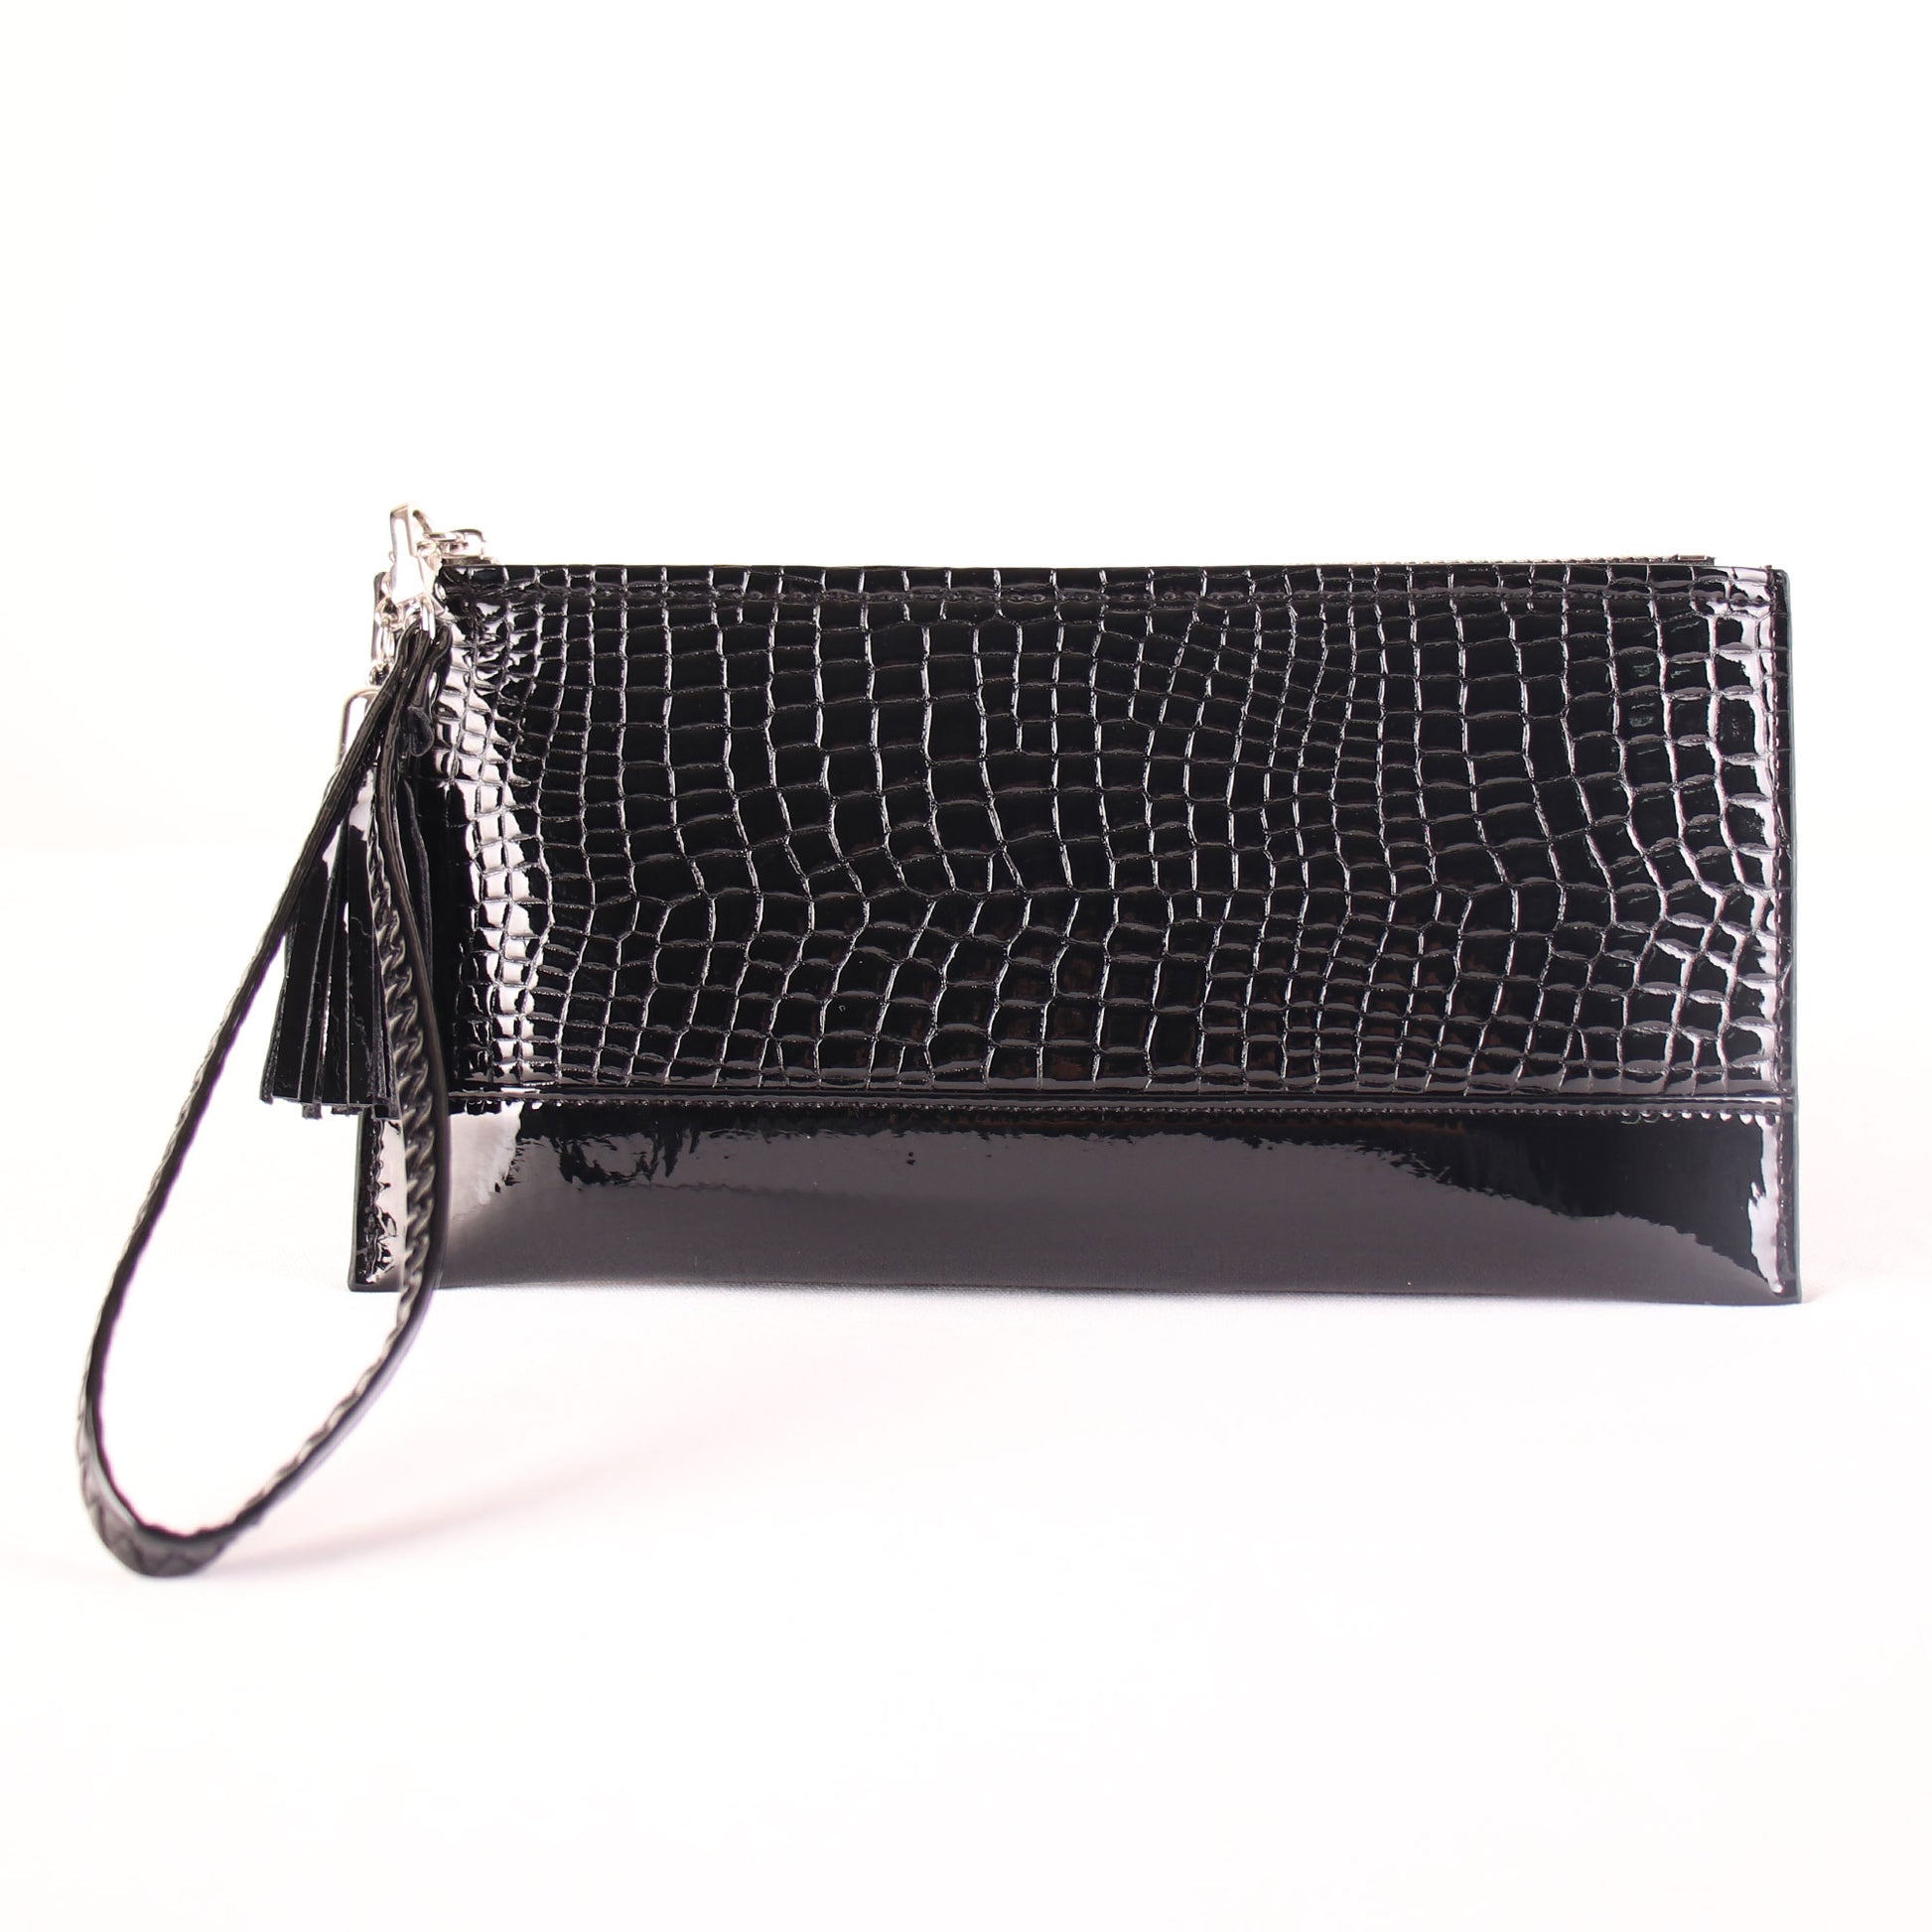 Wallet,The Squared Honeycomb Tassel Black Wallet - Cippele Multi Store